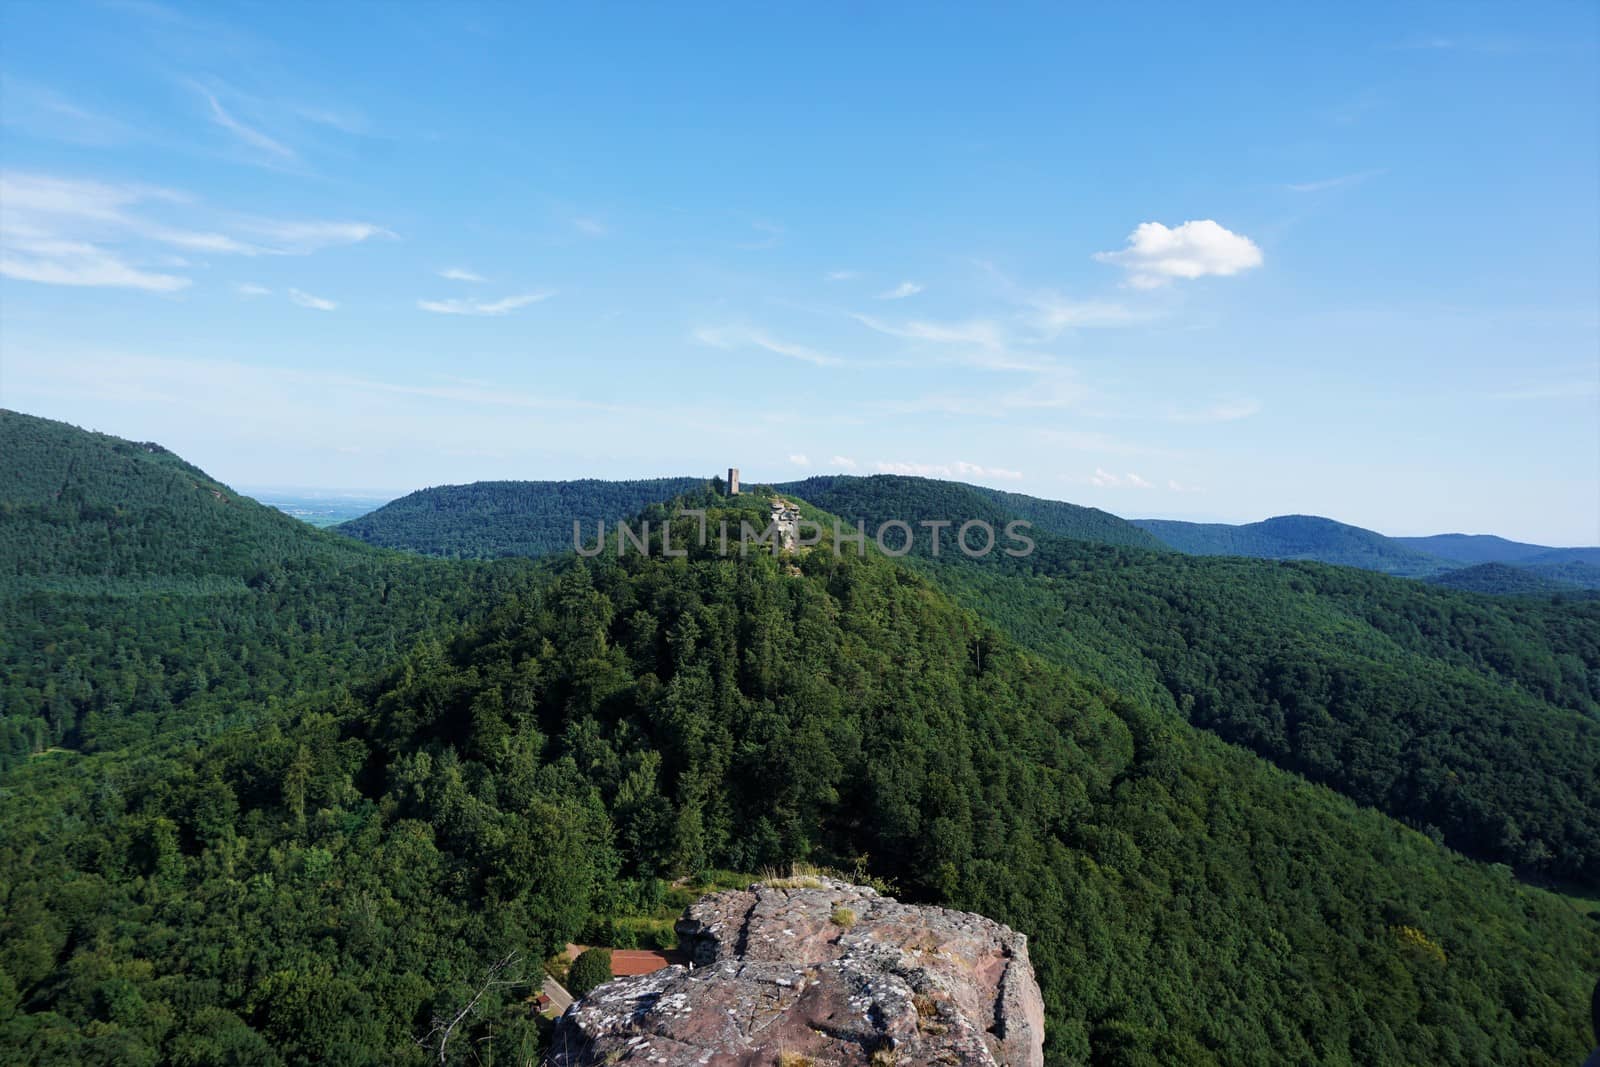 View over the hilly landscape of the Trifels area in Rhineland-Palatinate, Germany